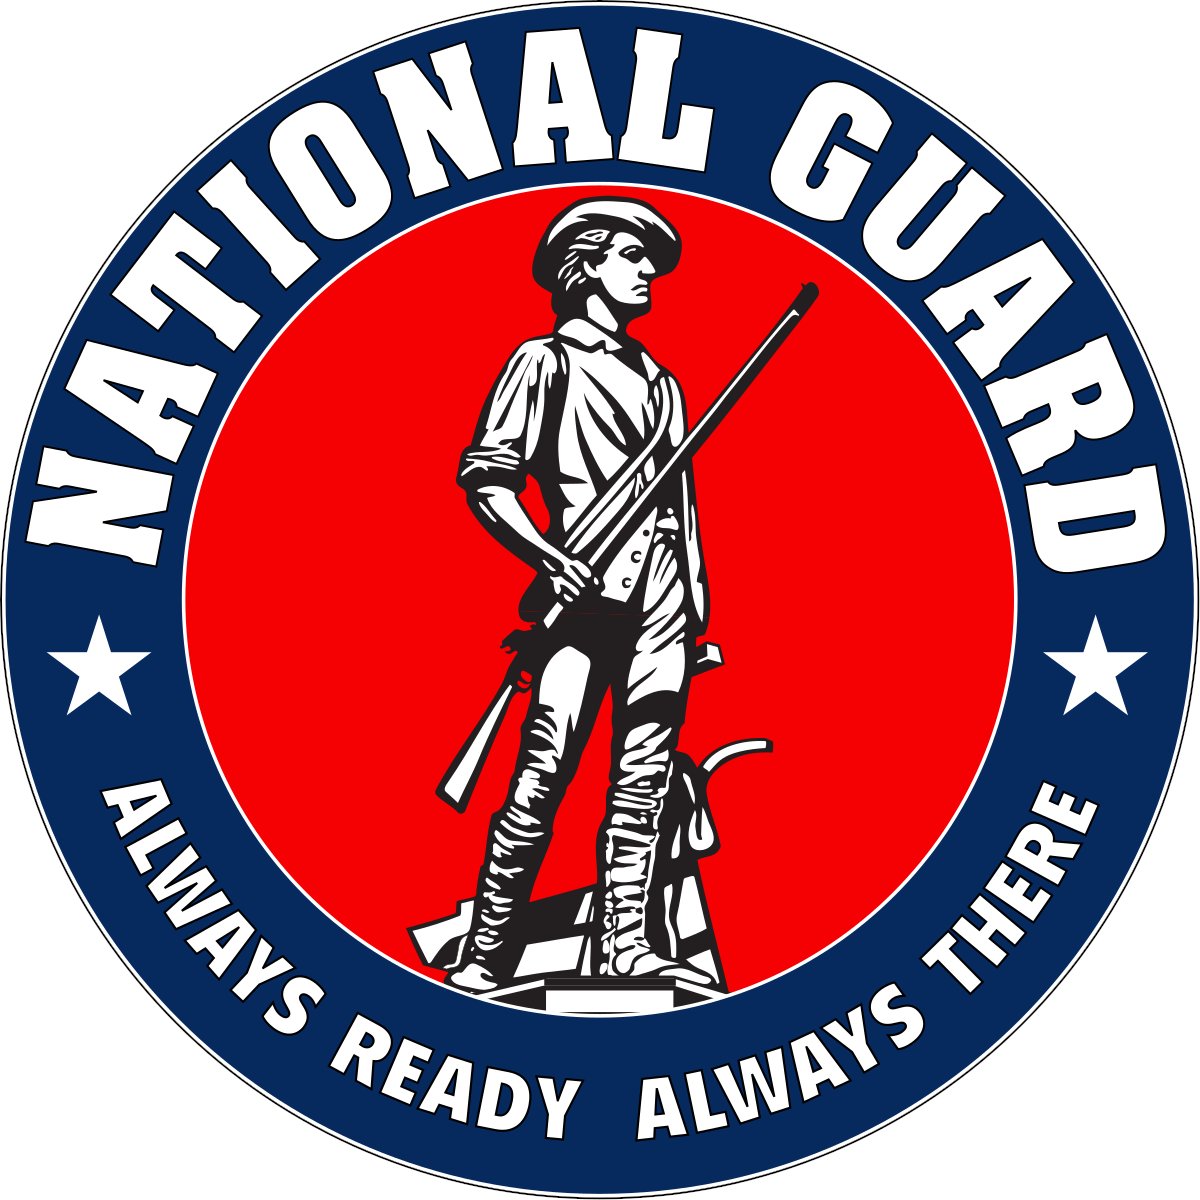 The Protective Mobilization Plan called for inducting Reserve and Army National Guard components to grow the force. GEN George C. Marshall pushed for this. Marshall was determined to bring the National Guard under federal control.  @USArmyReserve  @USNationalGuard  @USArmy